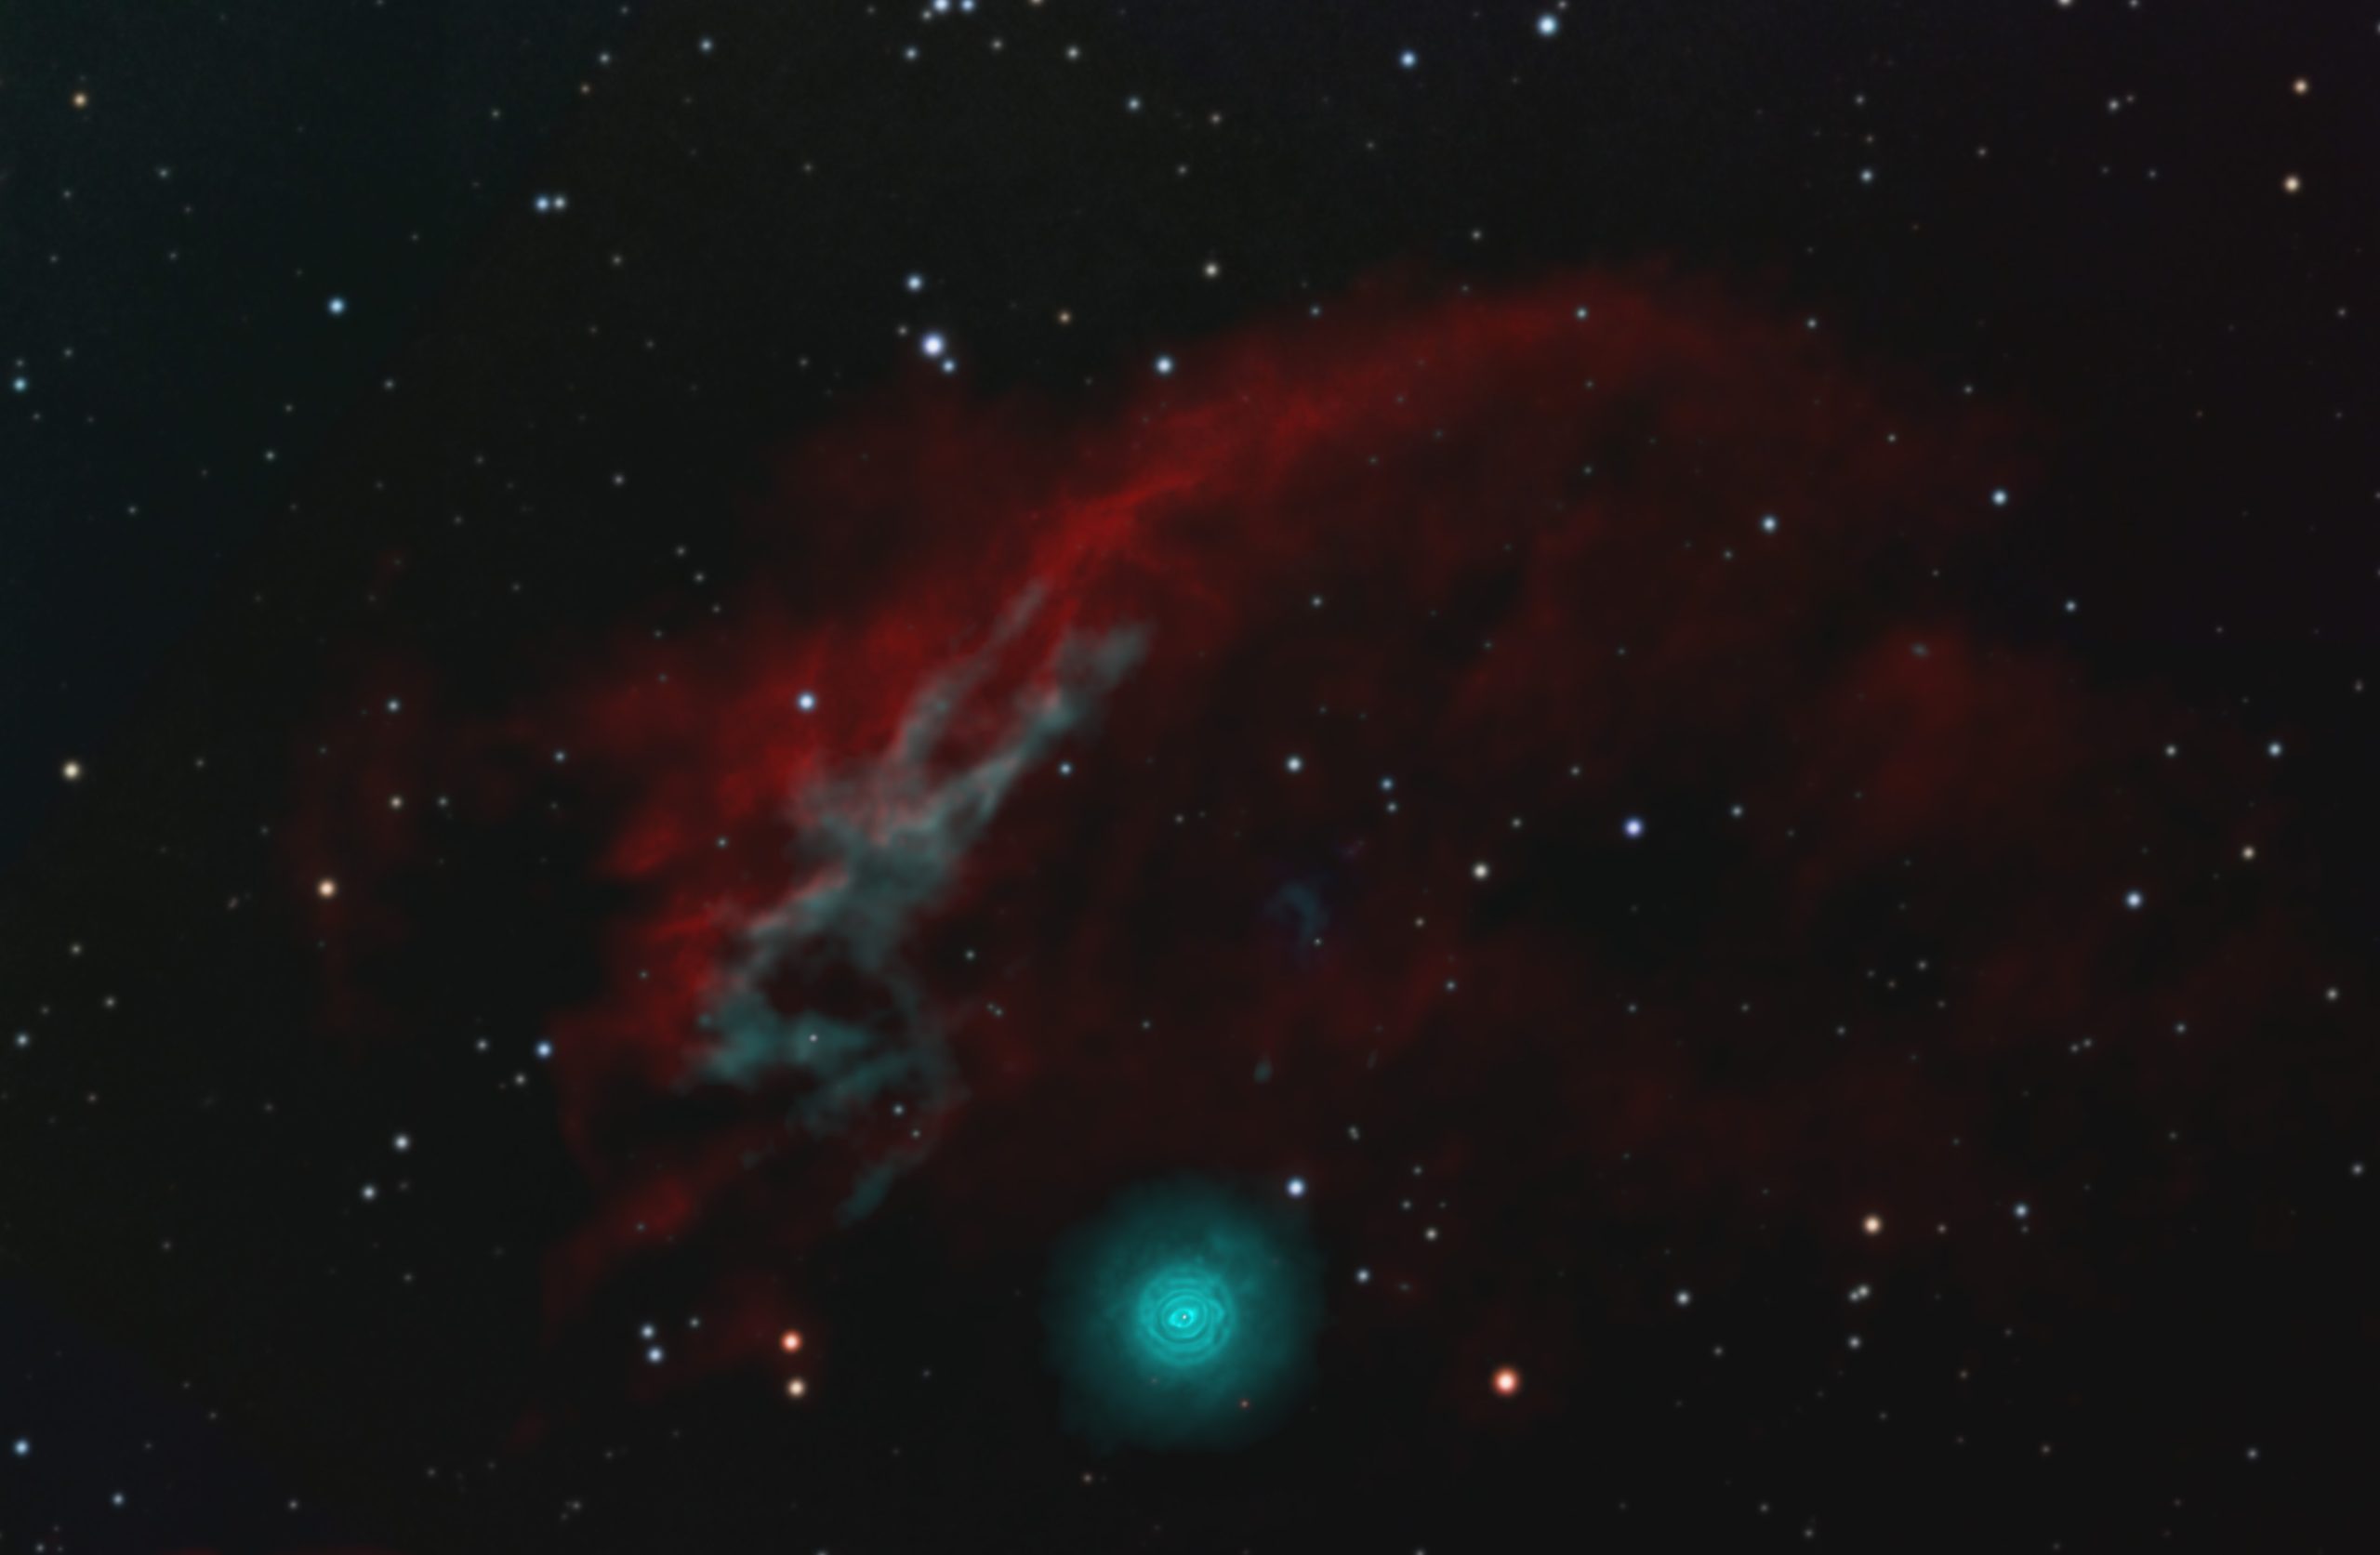 Condensed, spherical bluish nebula with arc of more diffuse red nebulosity above it